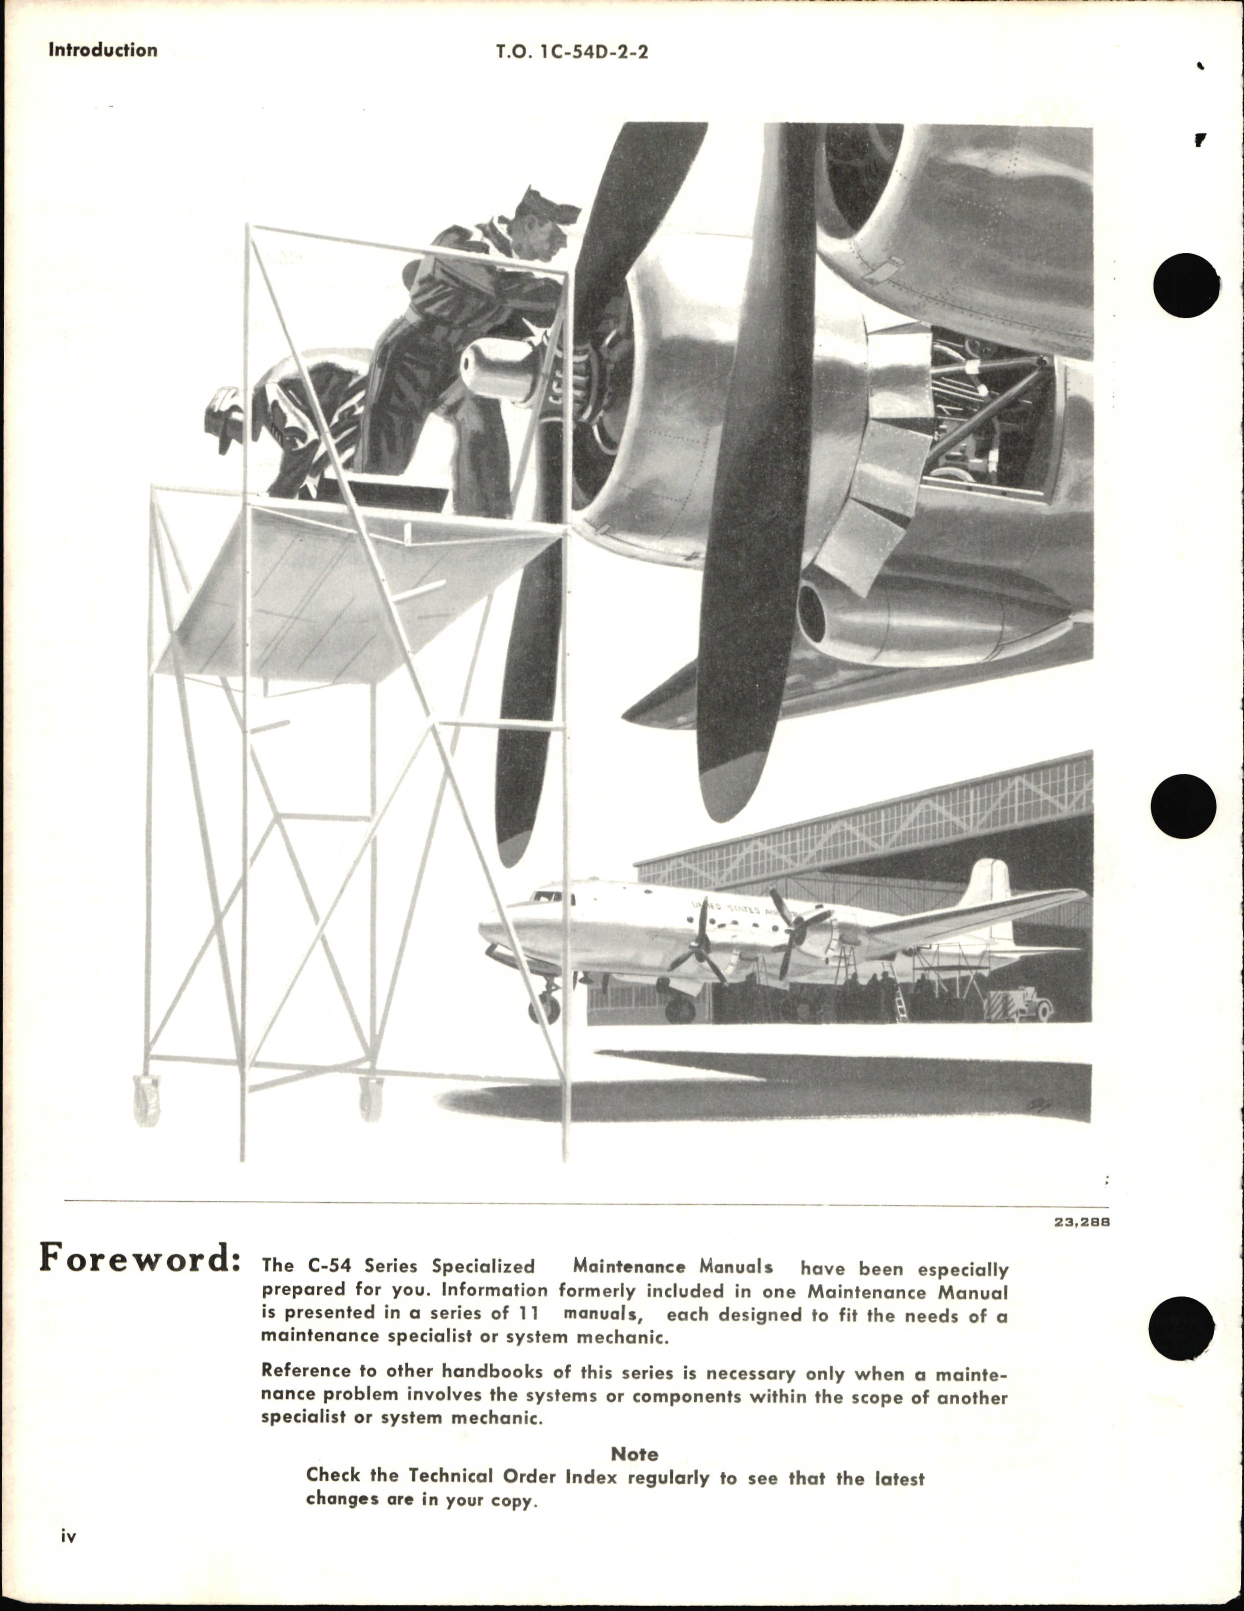 Sample page 6 from AirCorps Library document: Maintenance Instructions, Ground Handling, Servicing, and Airframe Maintenance for C-54D, D-54G, C-54E, and C-54M